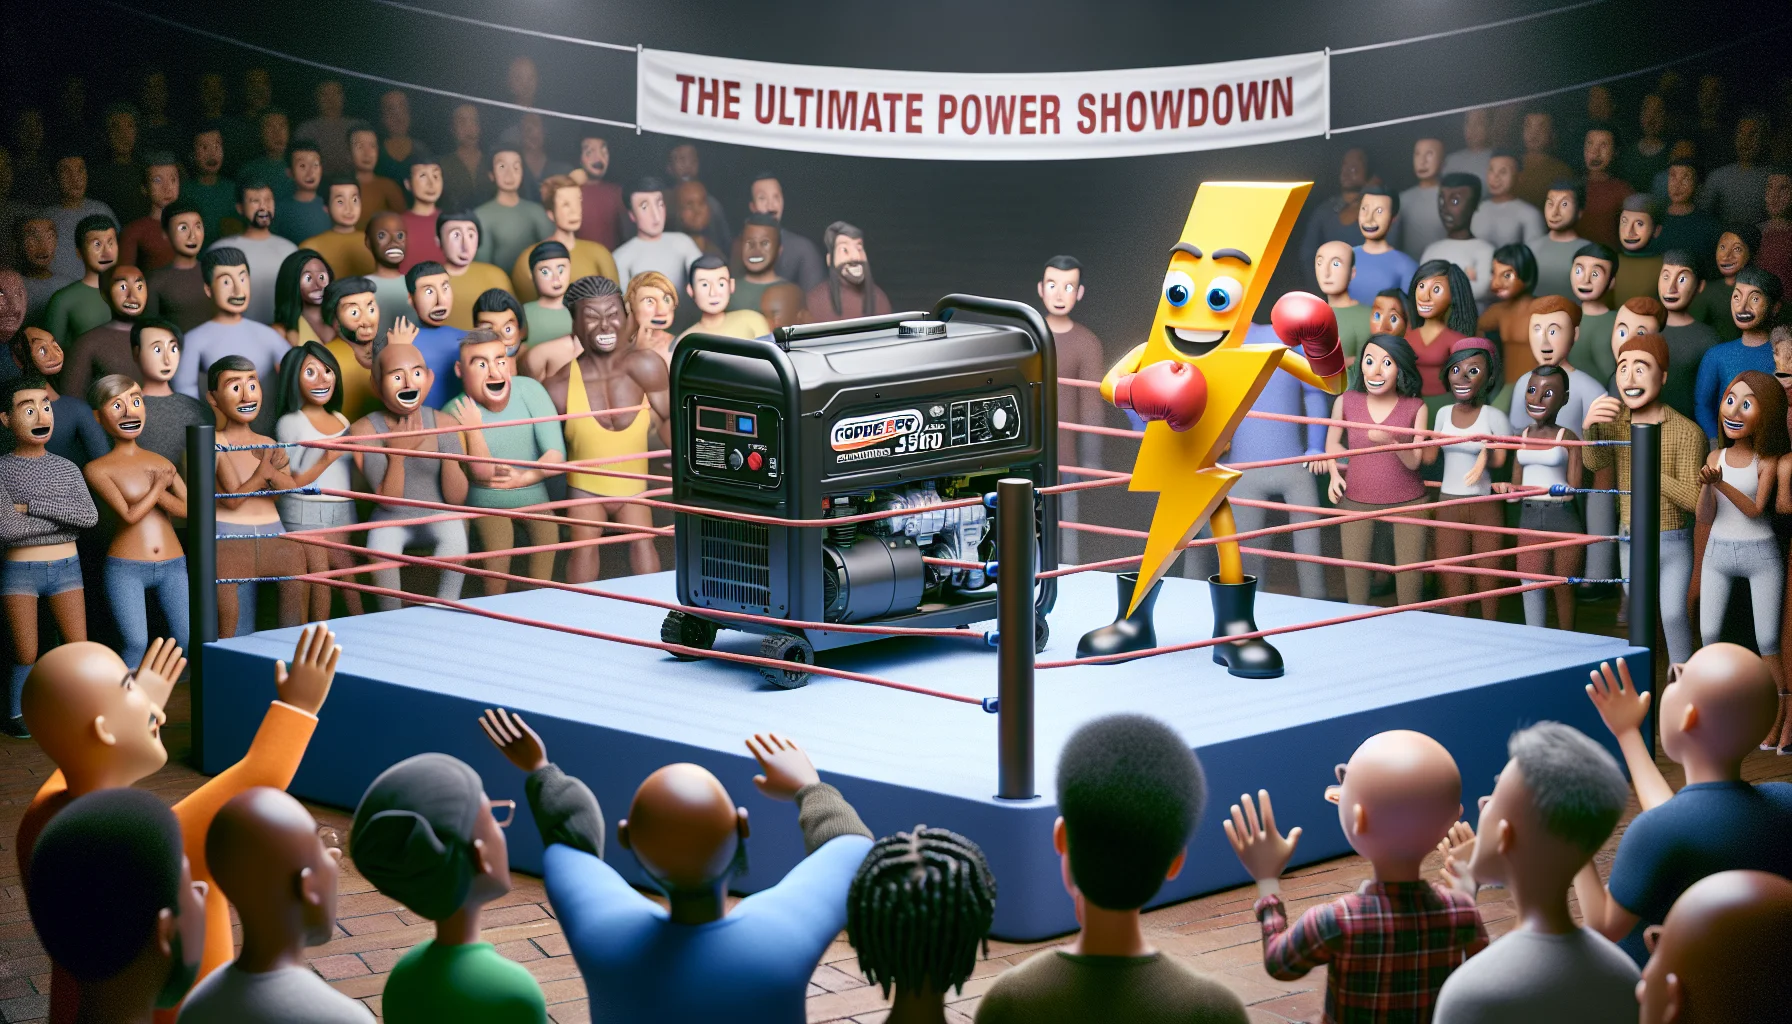 Image of a high-powered generic portable generator, labelled 'Power Pro 3500', in a humorous scenario to promote power generation. The generator is standing in a boxing ring with an anthropomorphized lightning bolt, both wearing boxing gloves. A surprised crowd of diverse onlookers, including men and women of Hispanic, Black, Middle-Eastern, South Asian and Caucasian descent, reacts to the scene. A banner over the ring says 'The Ultimate Power Showdown'. The atmosphere is both exciting and absurd, intended to make people smile and consider the benefits of generating their own electricity.